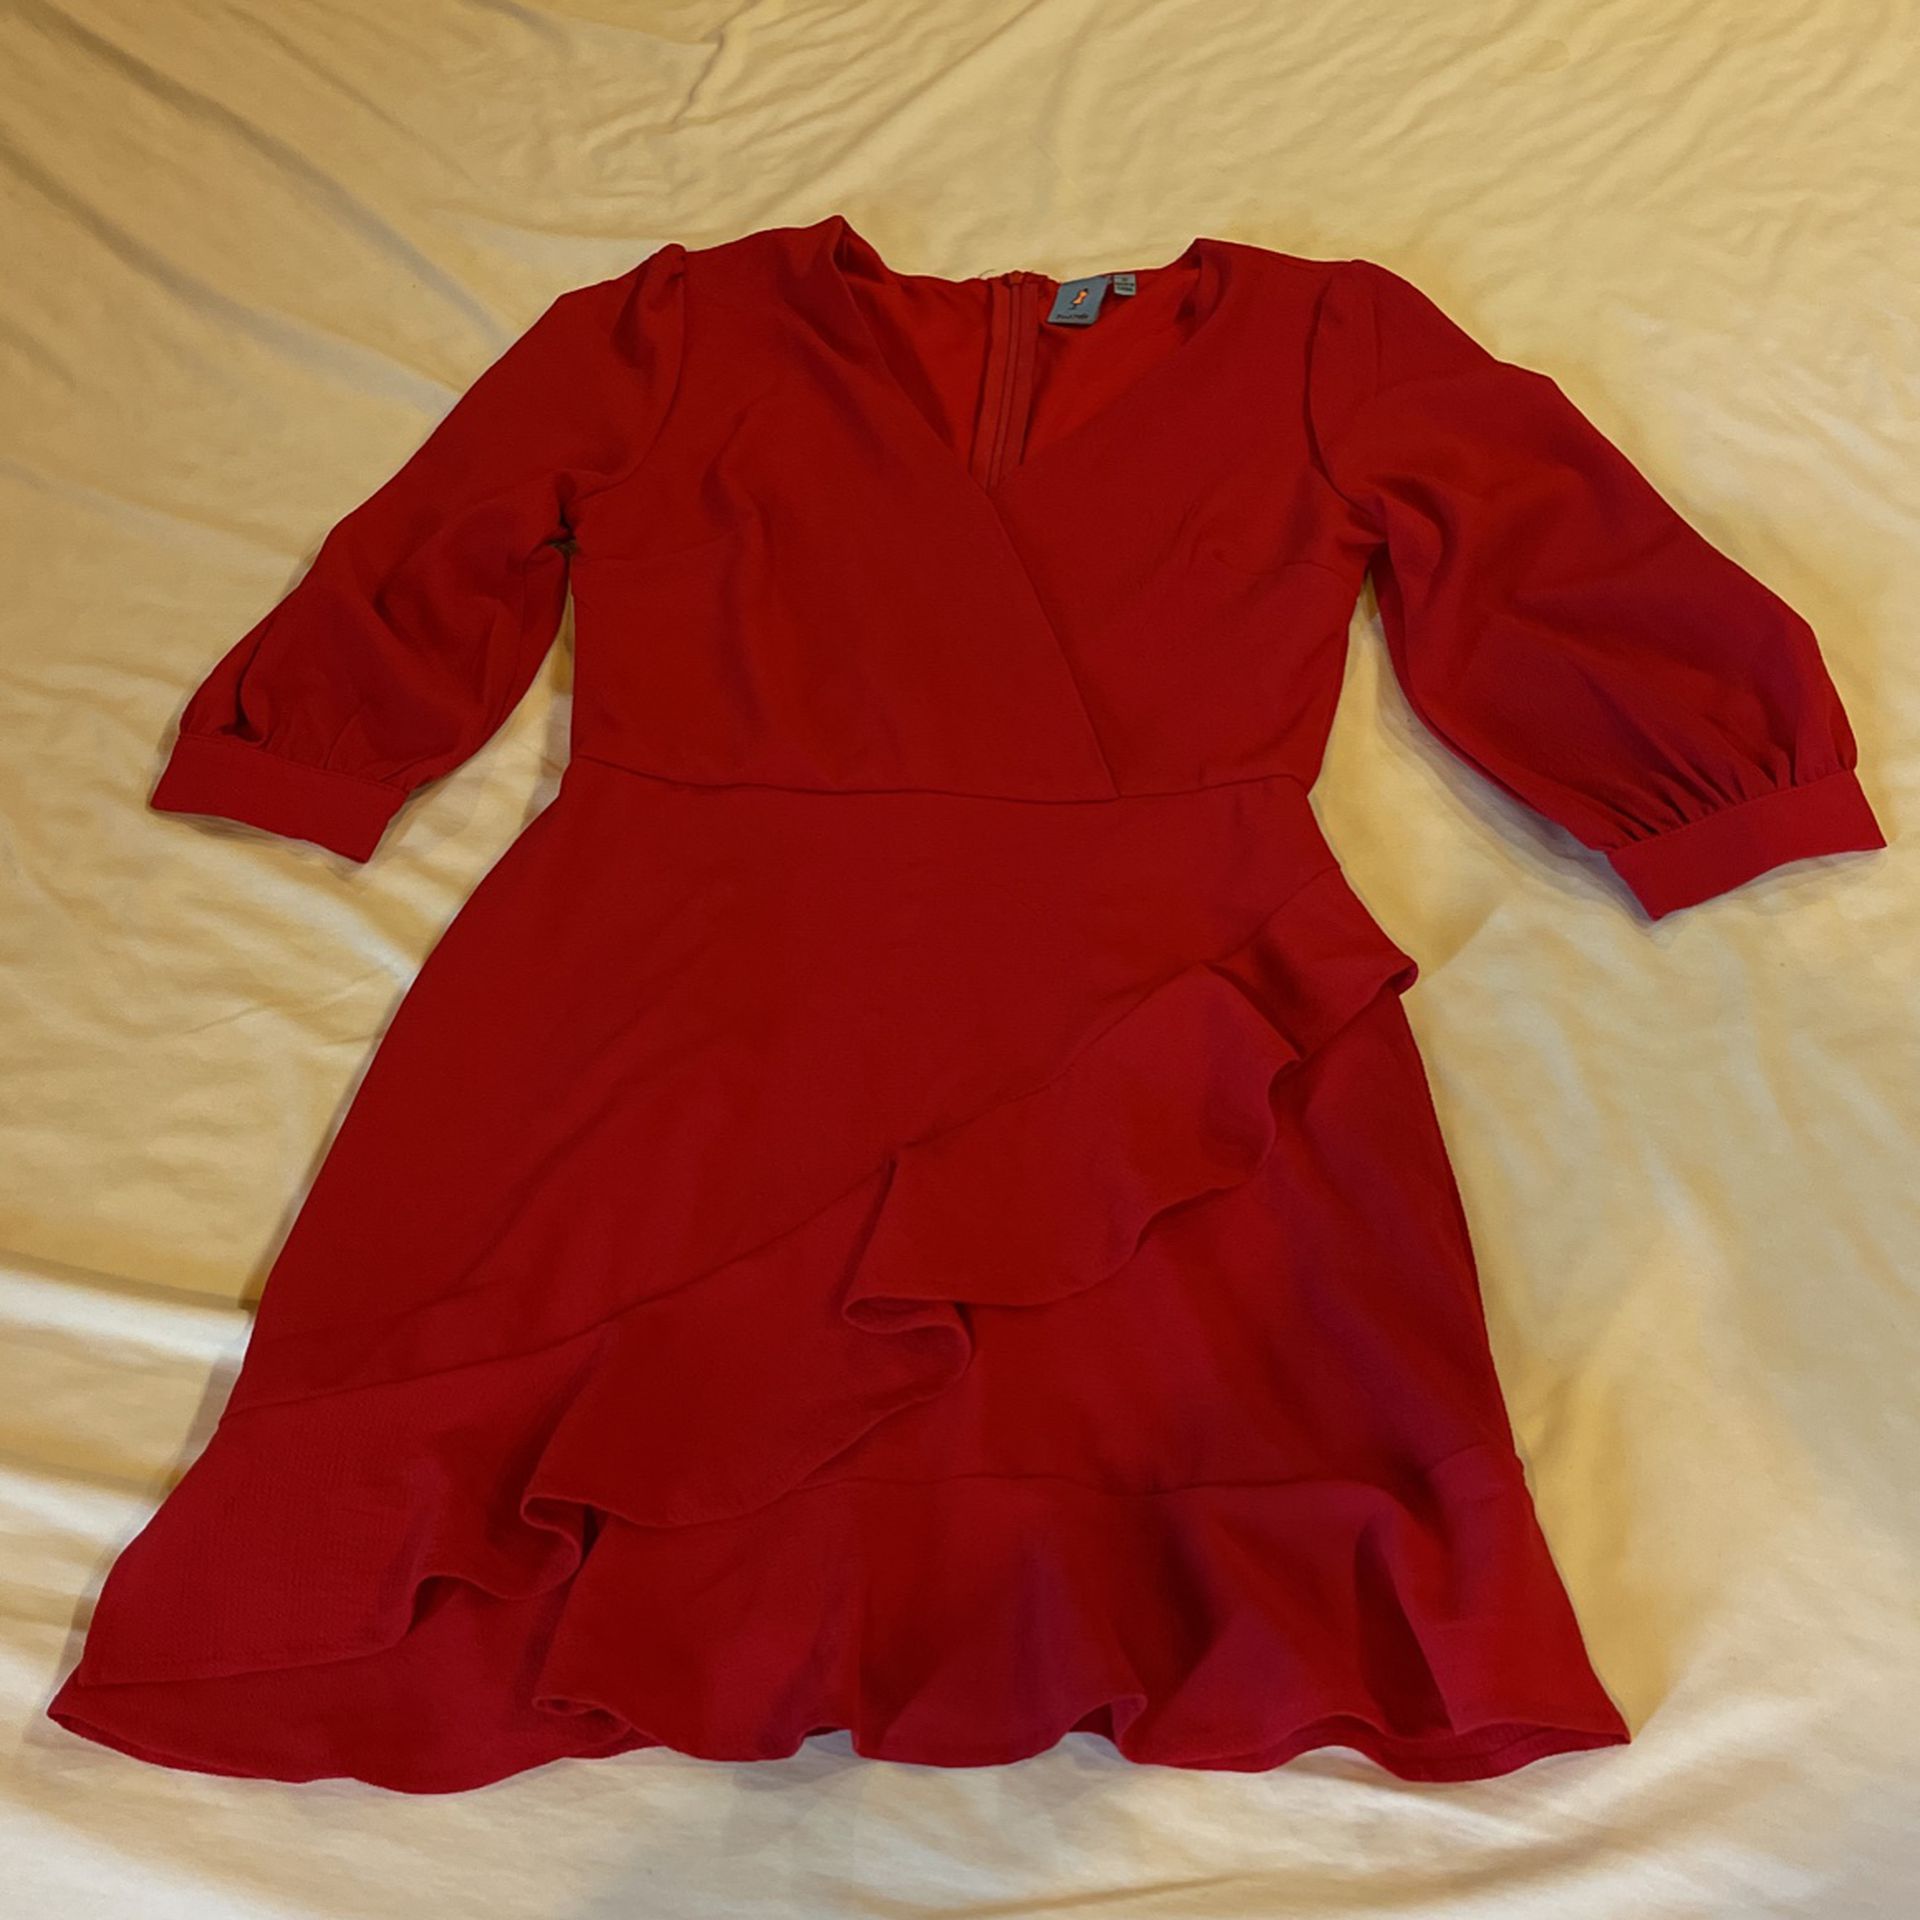 (S) Beautiful Red Party Dress Zipper Back  $7 Paid $39 Macy’s 